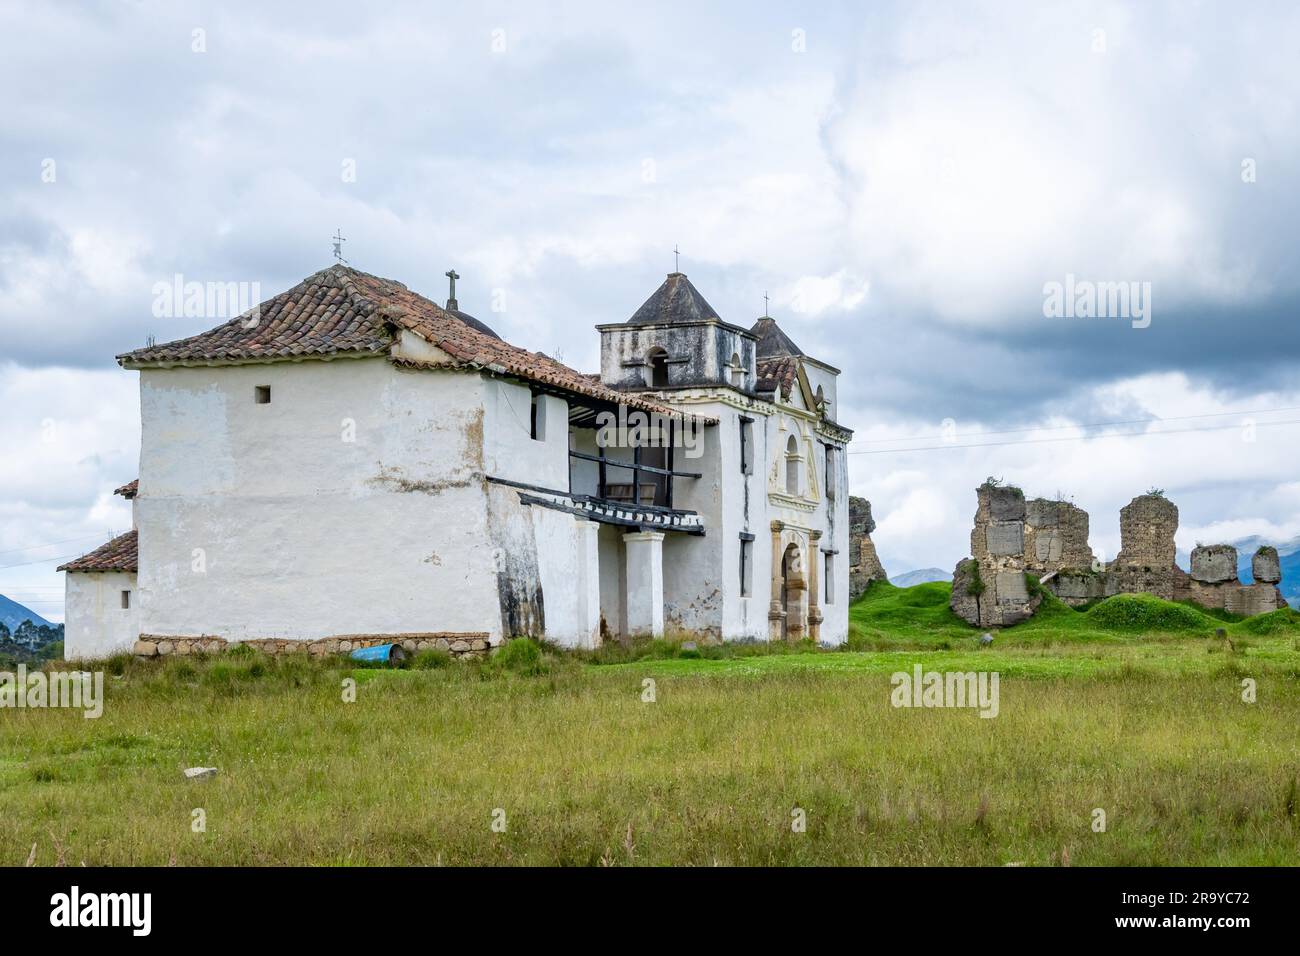 Capilla de Siecha, a historical settlement and chapel, is a national monument. Guasca, Cundinamarca, Colombia, South America. Stock Photo